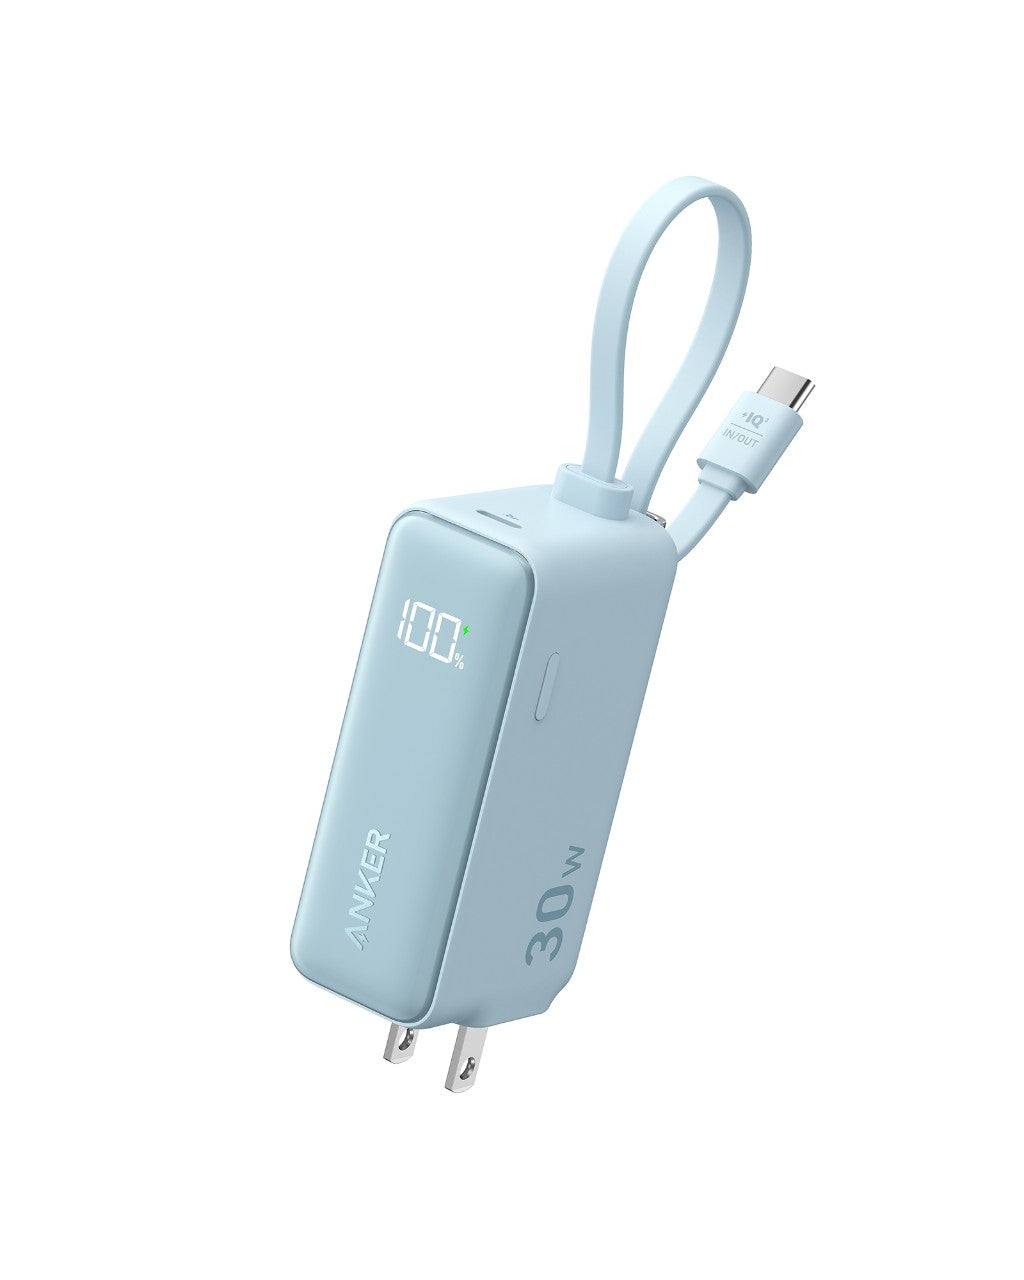 Anker 3-in-1 Power Bank (30W, Fusion, Built-In USB-C Cable) Baby Blue